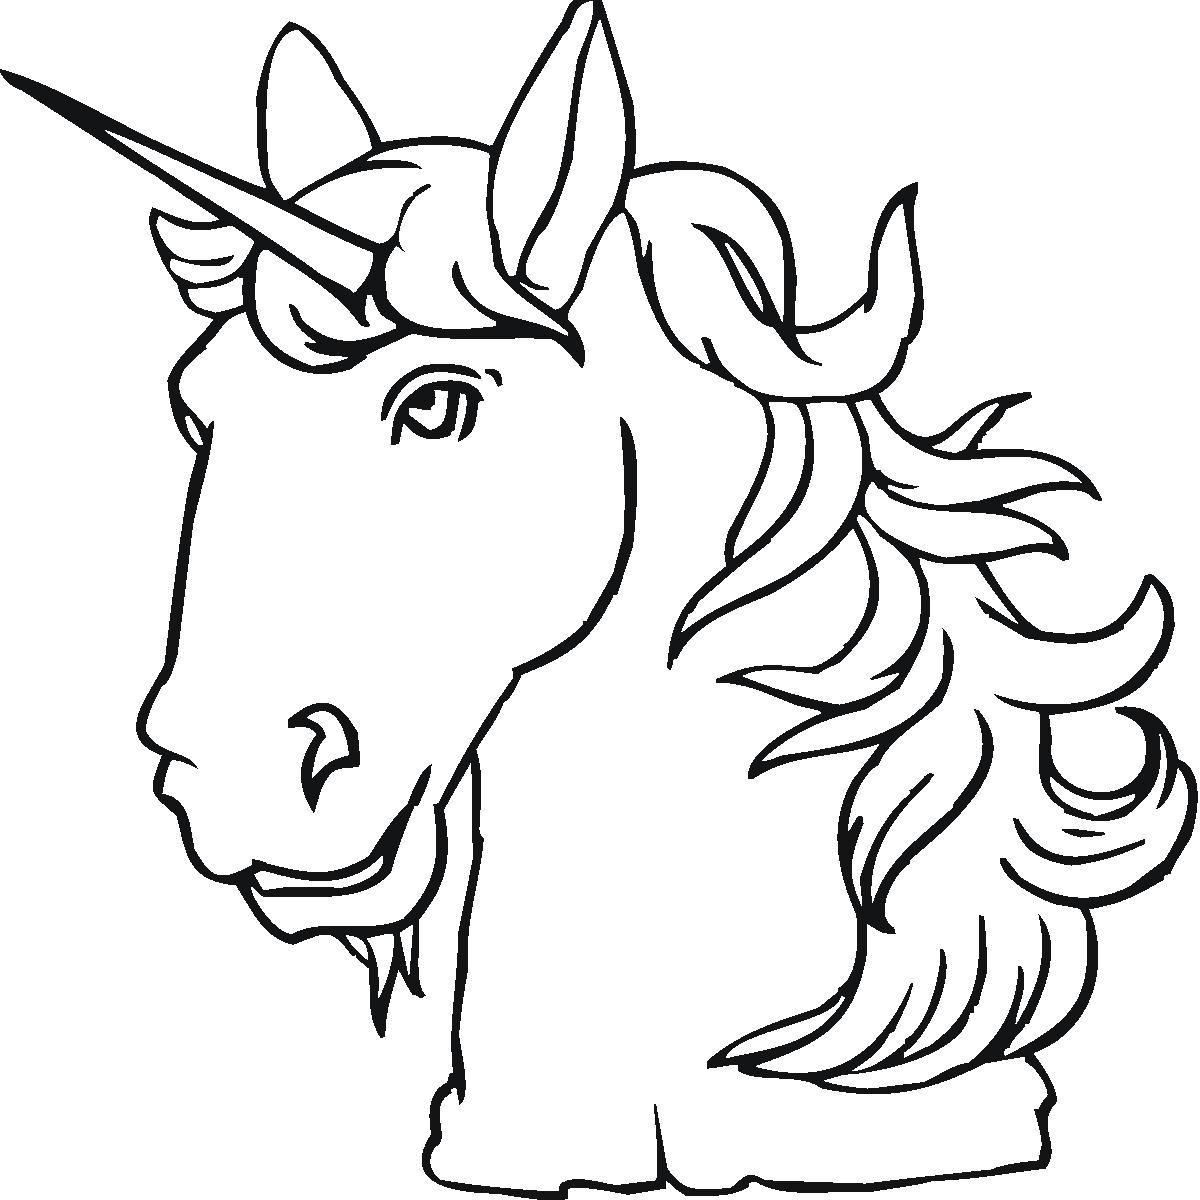 Unicorn Coloring Pages - Printable Free Coloring Pages